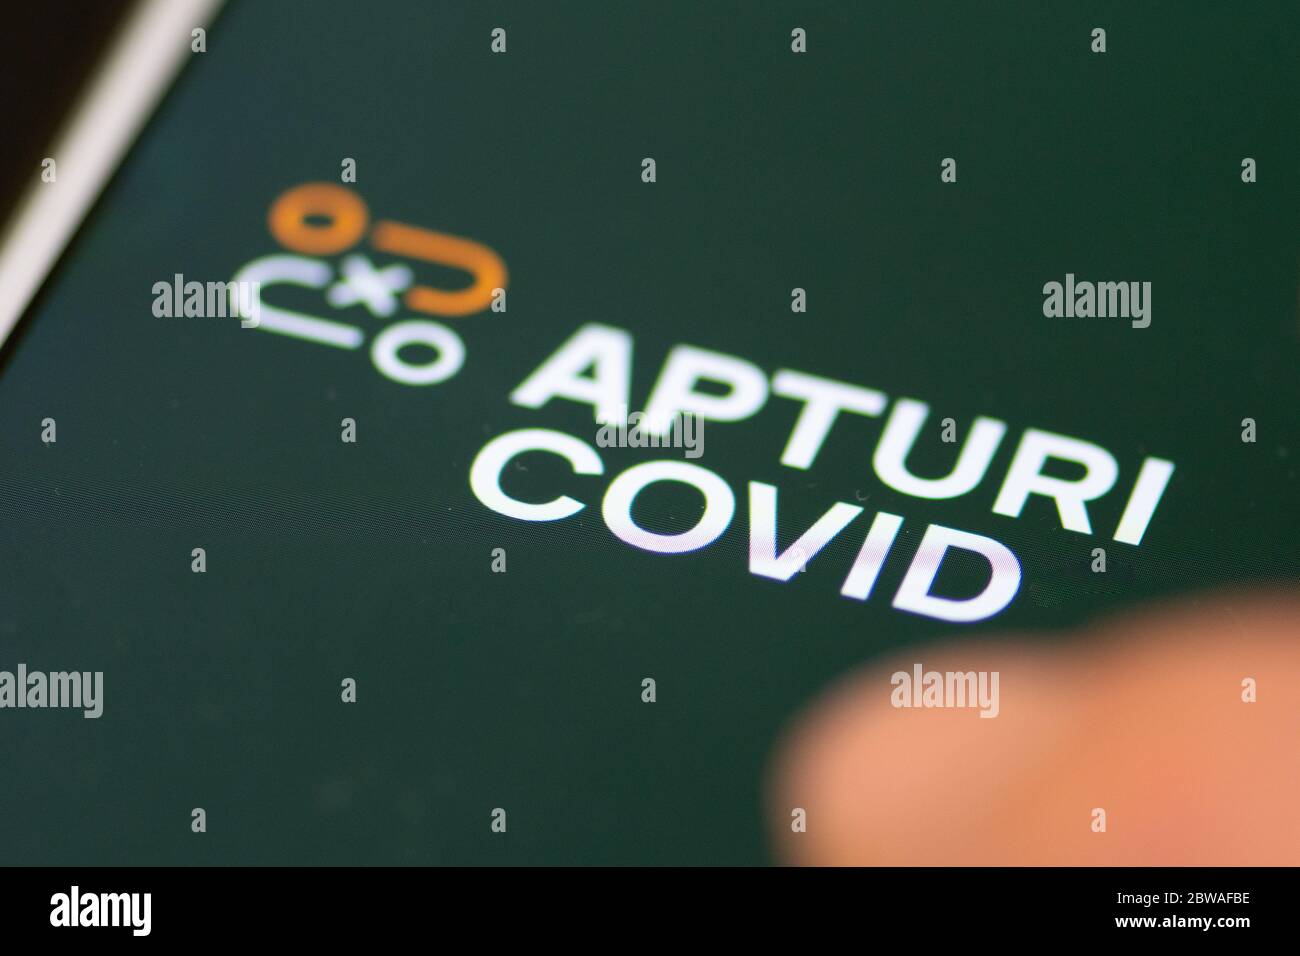 Stop Covid, Apturi Covid, official COVID-19 or Coronavirus contact tracing app for Latvia, Europe, first application in the world Stock Photo